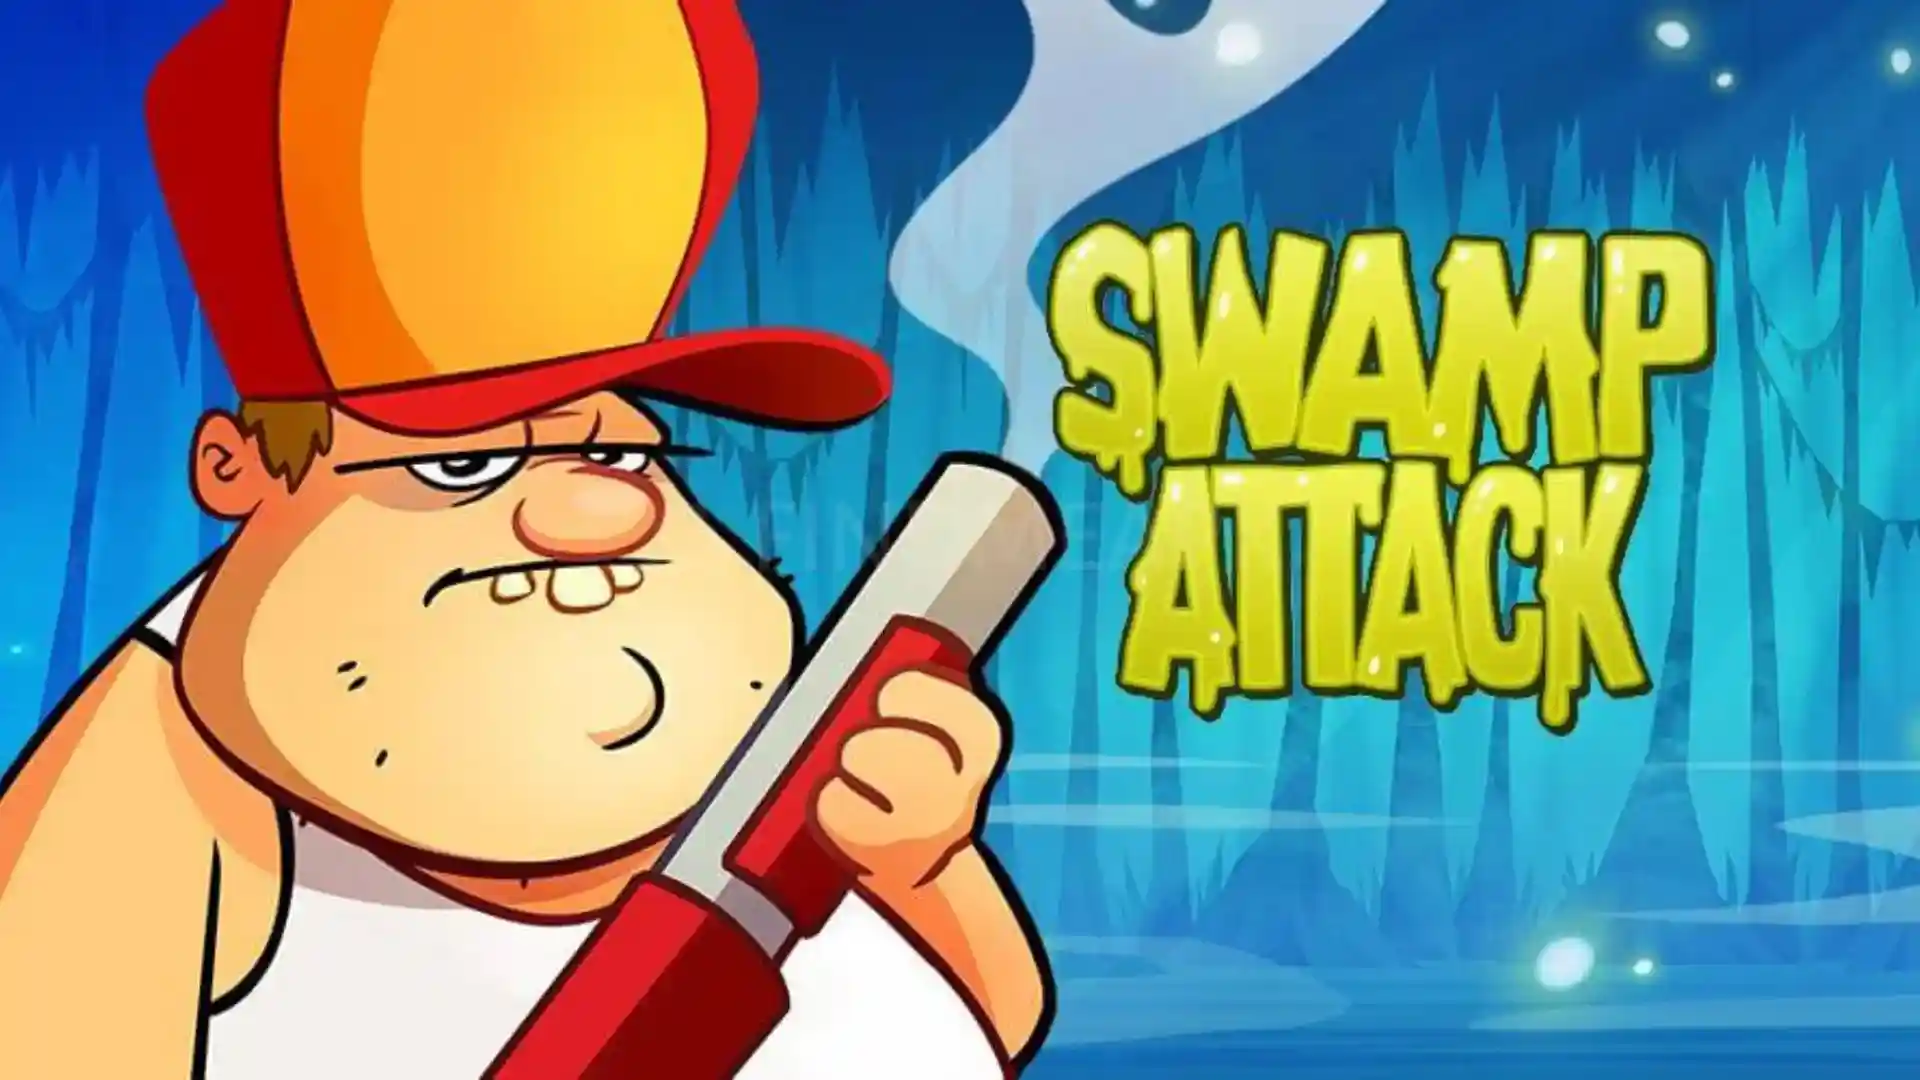 Swamp Attack feature image